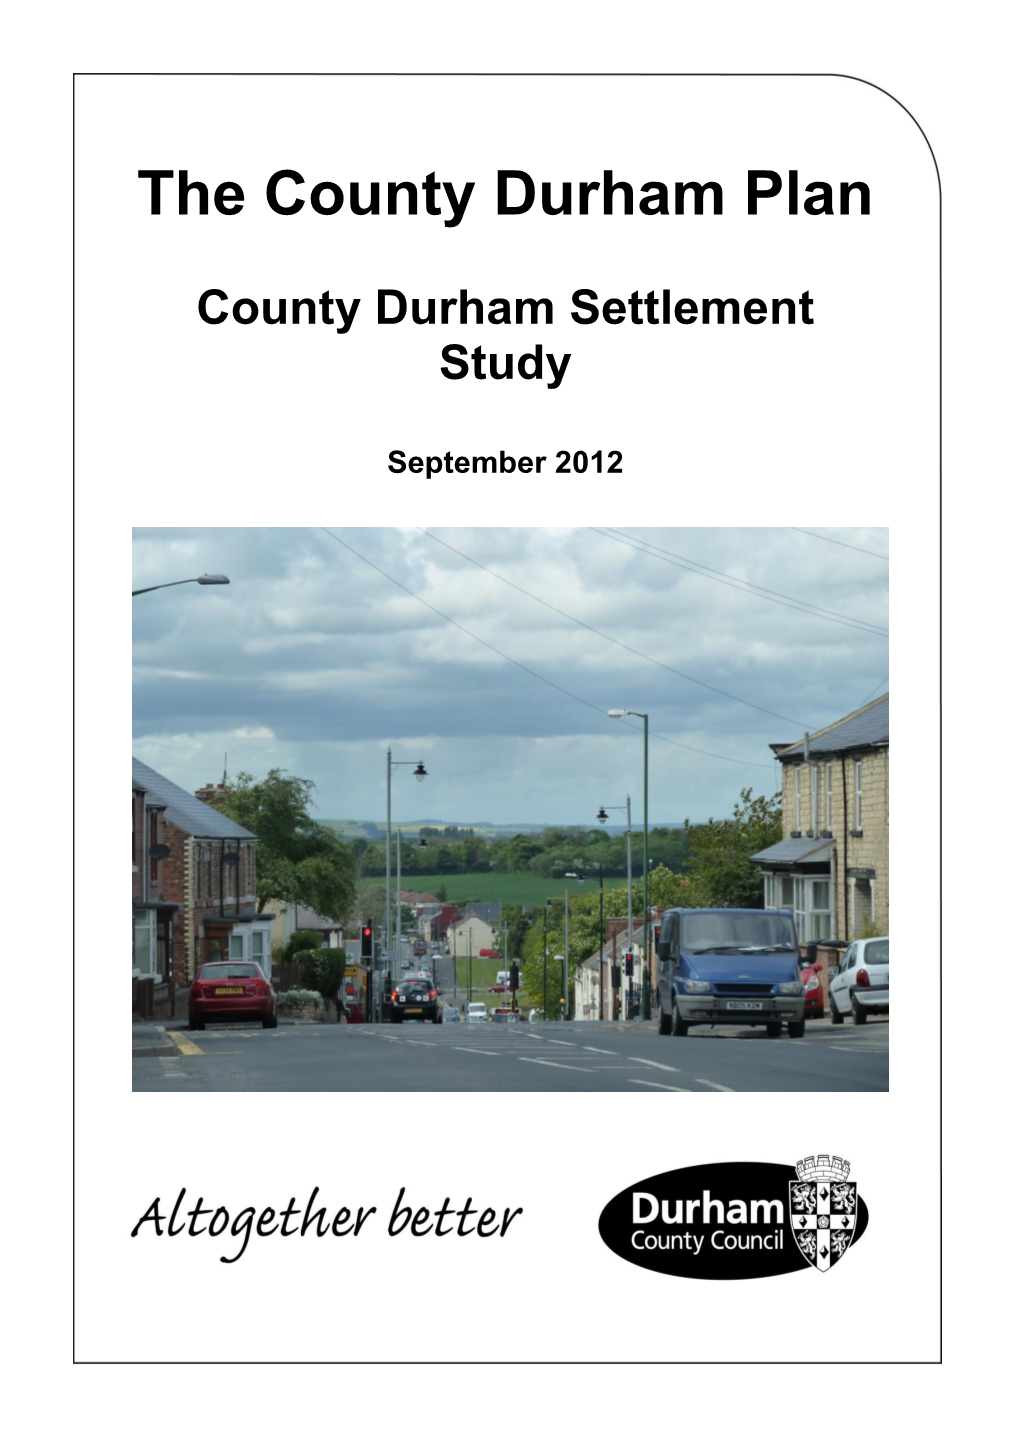 County Durham Settlement Study Sept 2012 Planning the Future of County Durham 1 Context